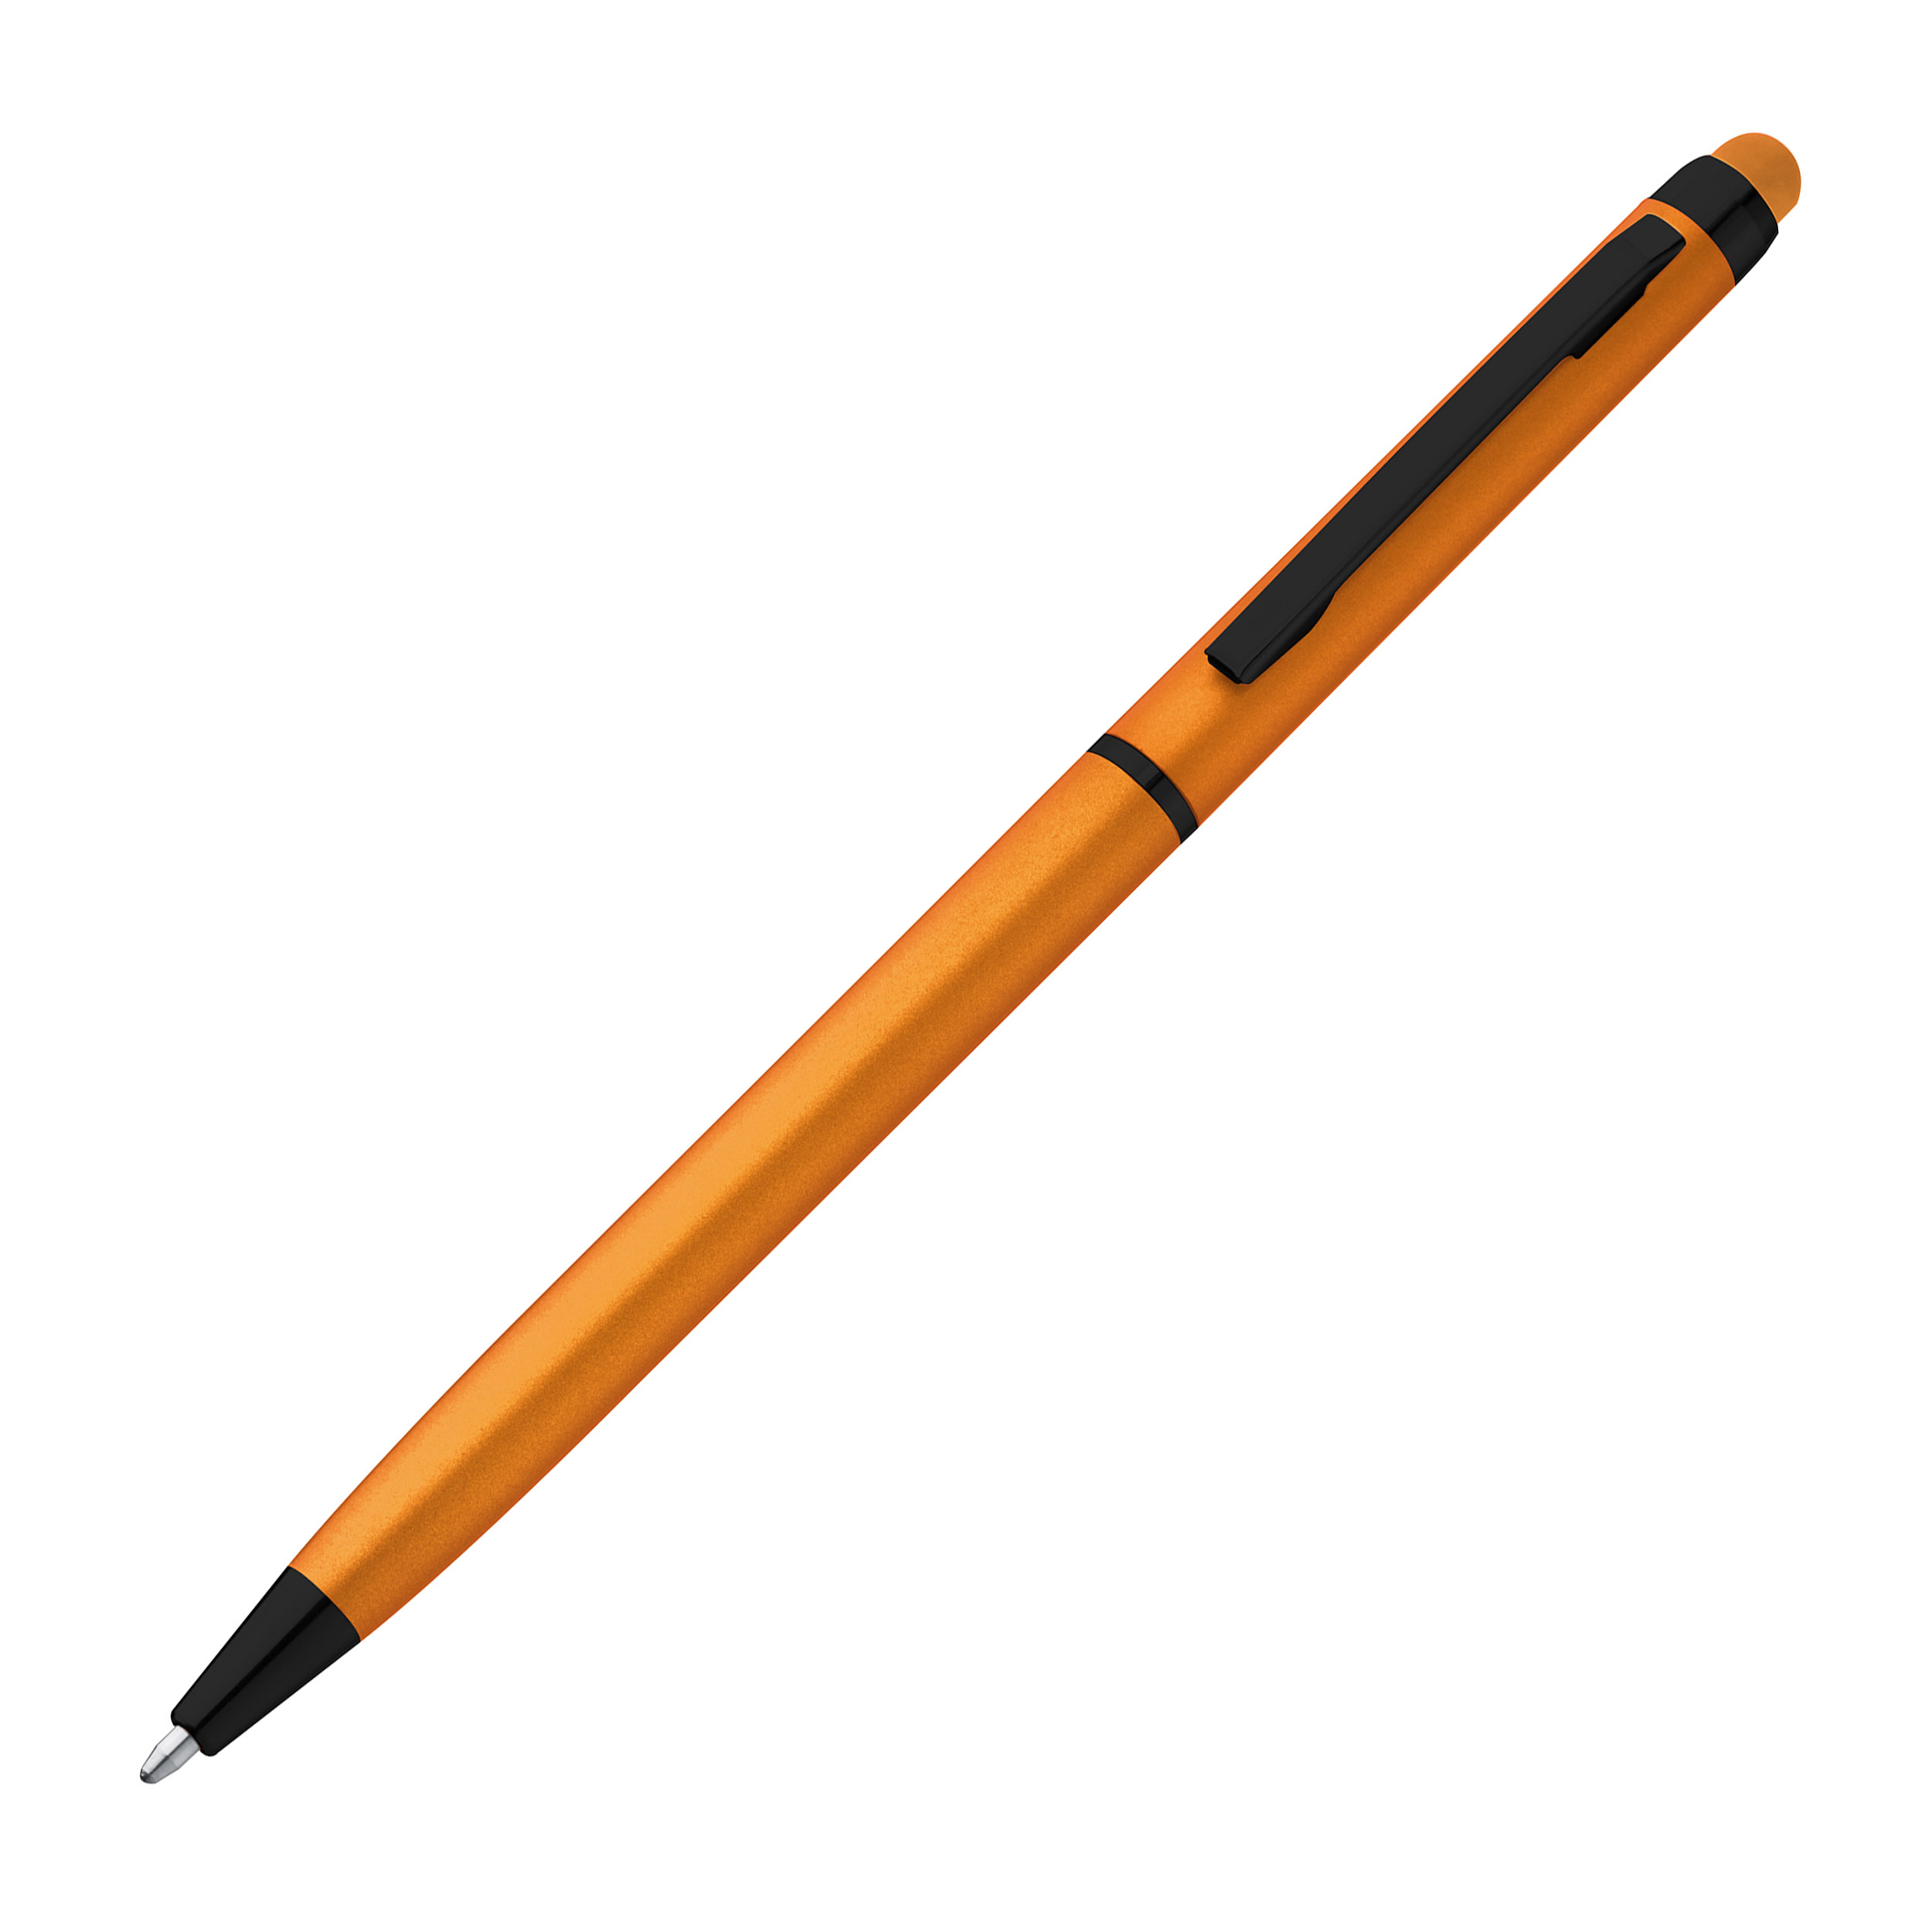 Metal ball pen with touch function